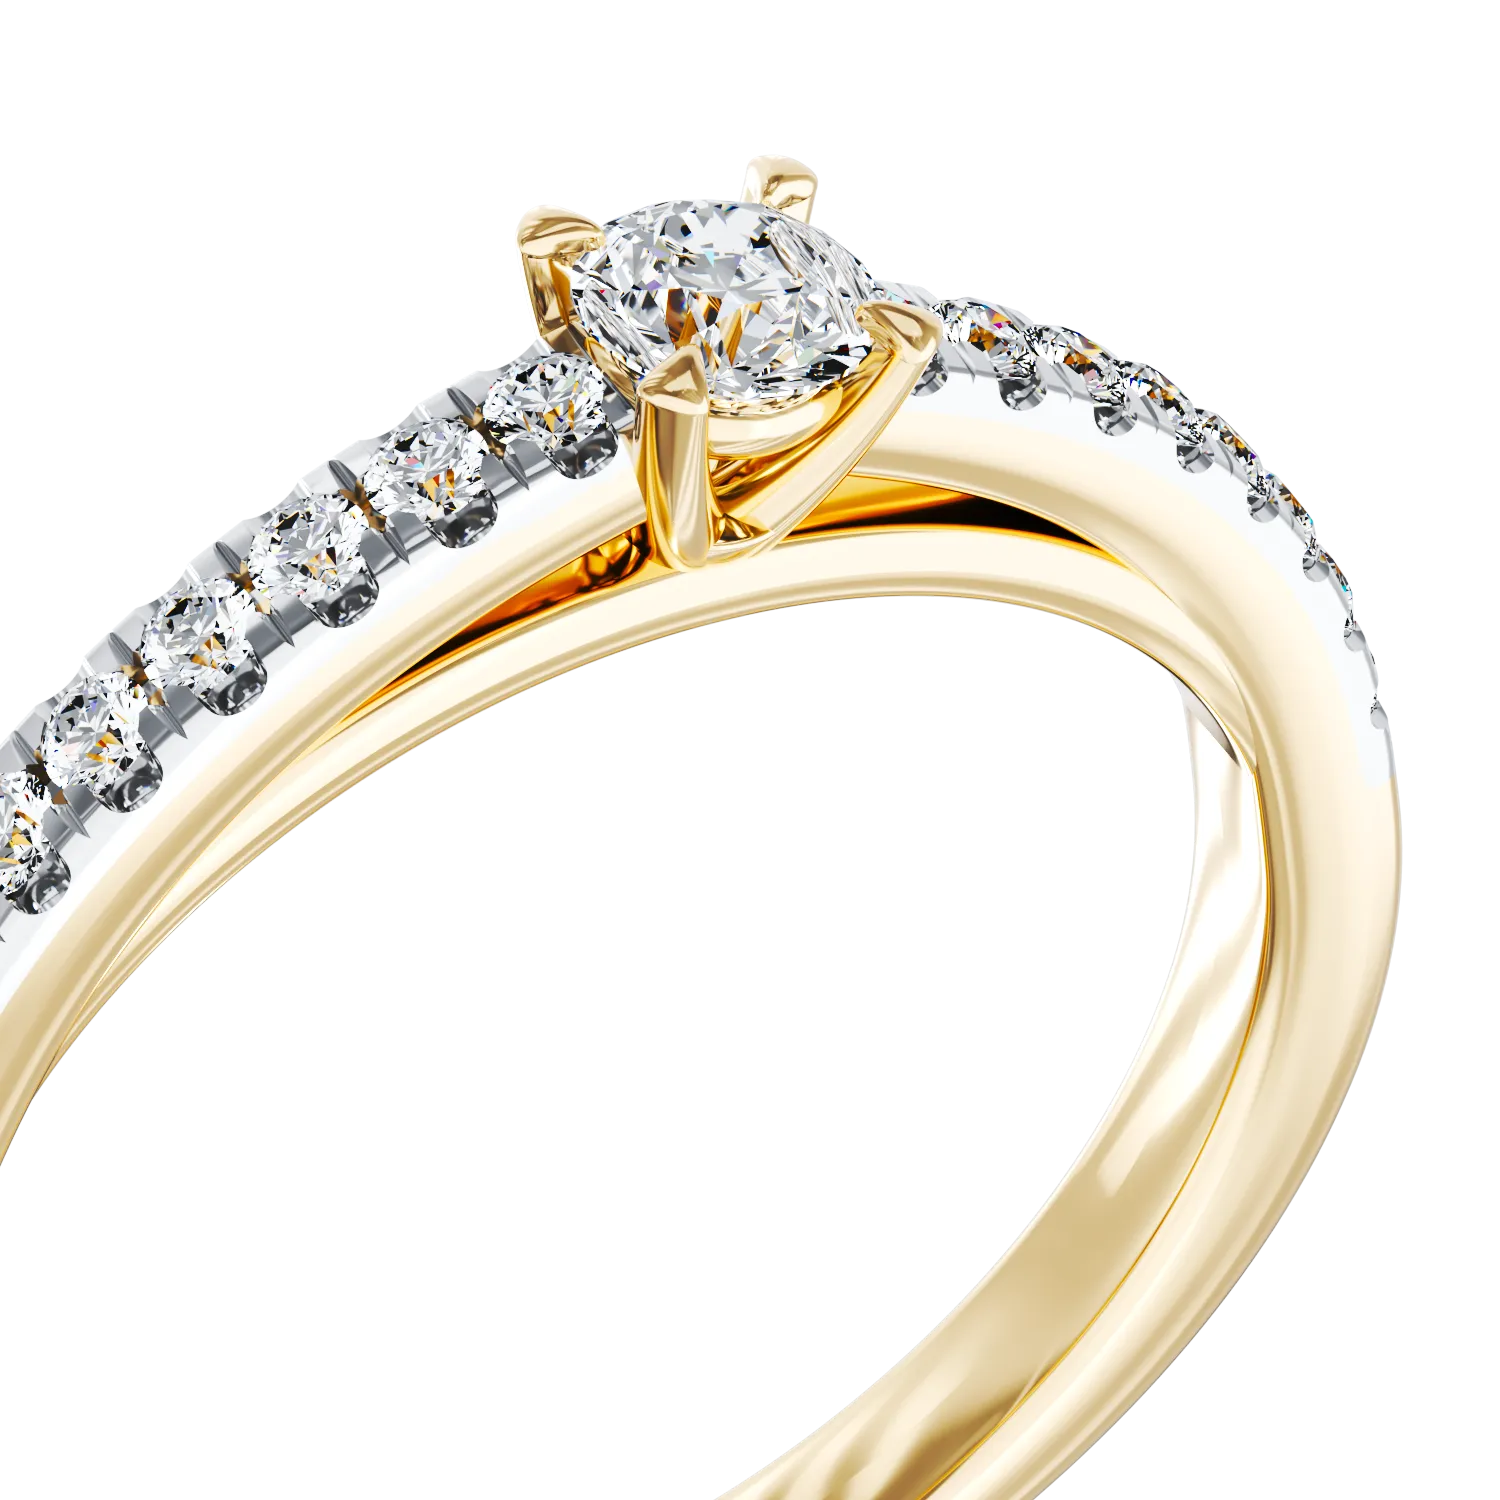 18K yellow gold engagement ring with 0.11ct diamond and 0.145ct diamonds